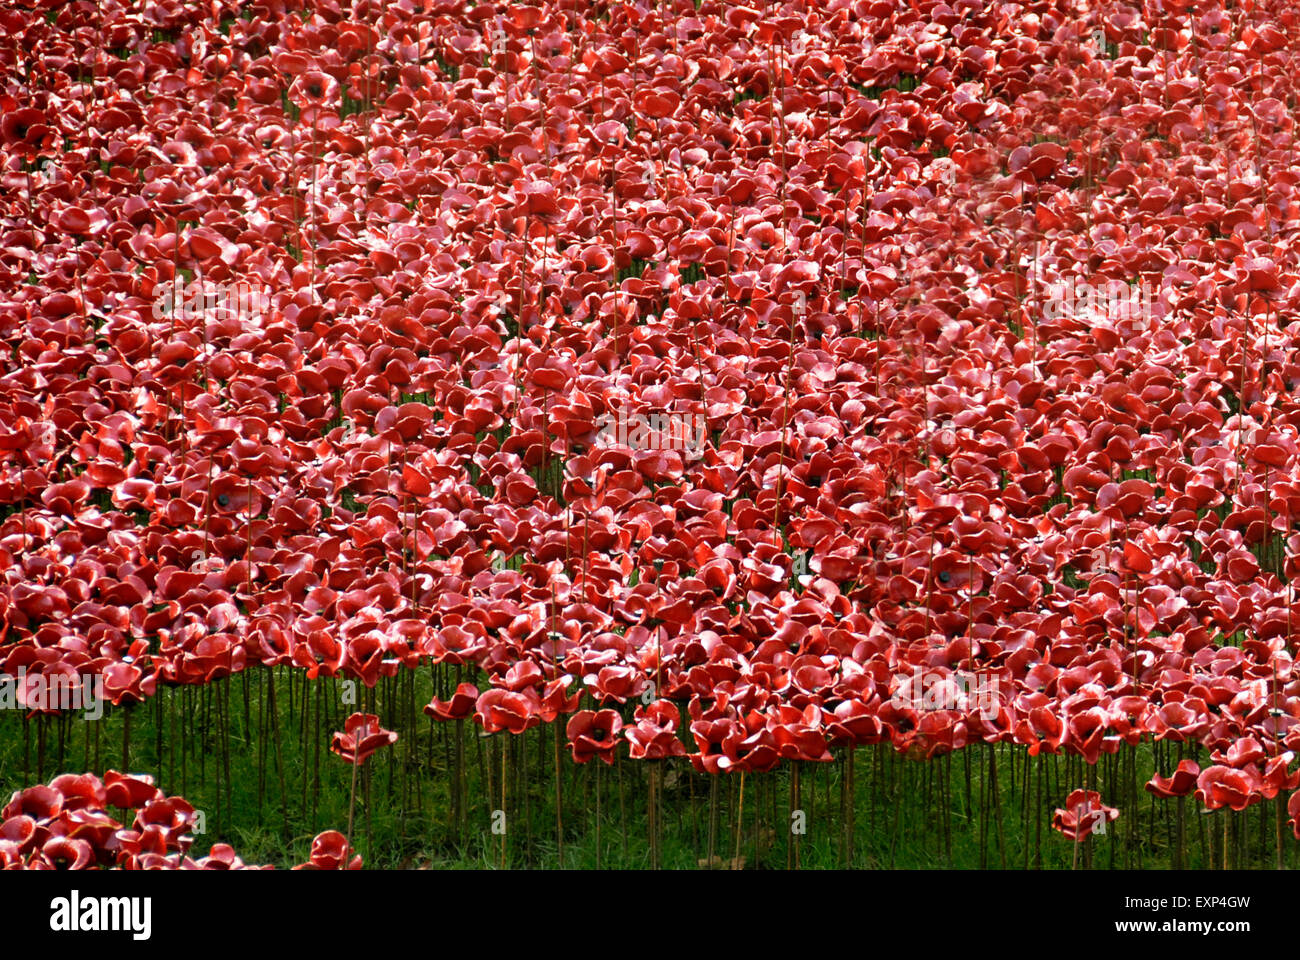 Blood Swept Lands and Seas of Red, Tower of London Poppies World War One Art Installation, London 2014 Stock Photo